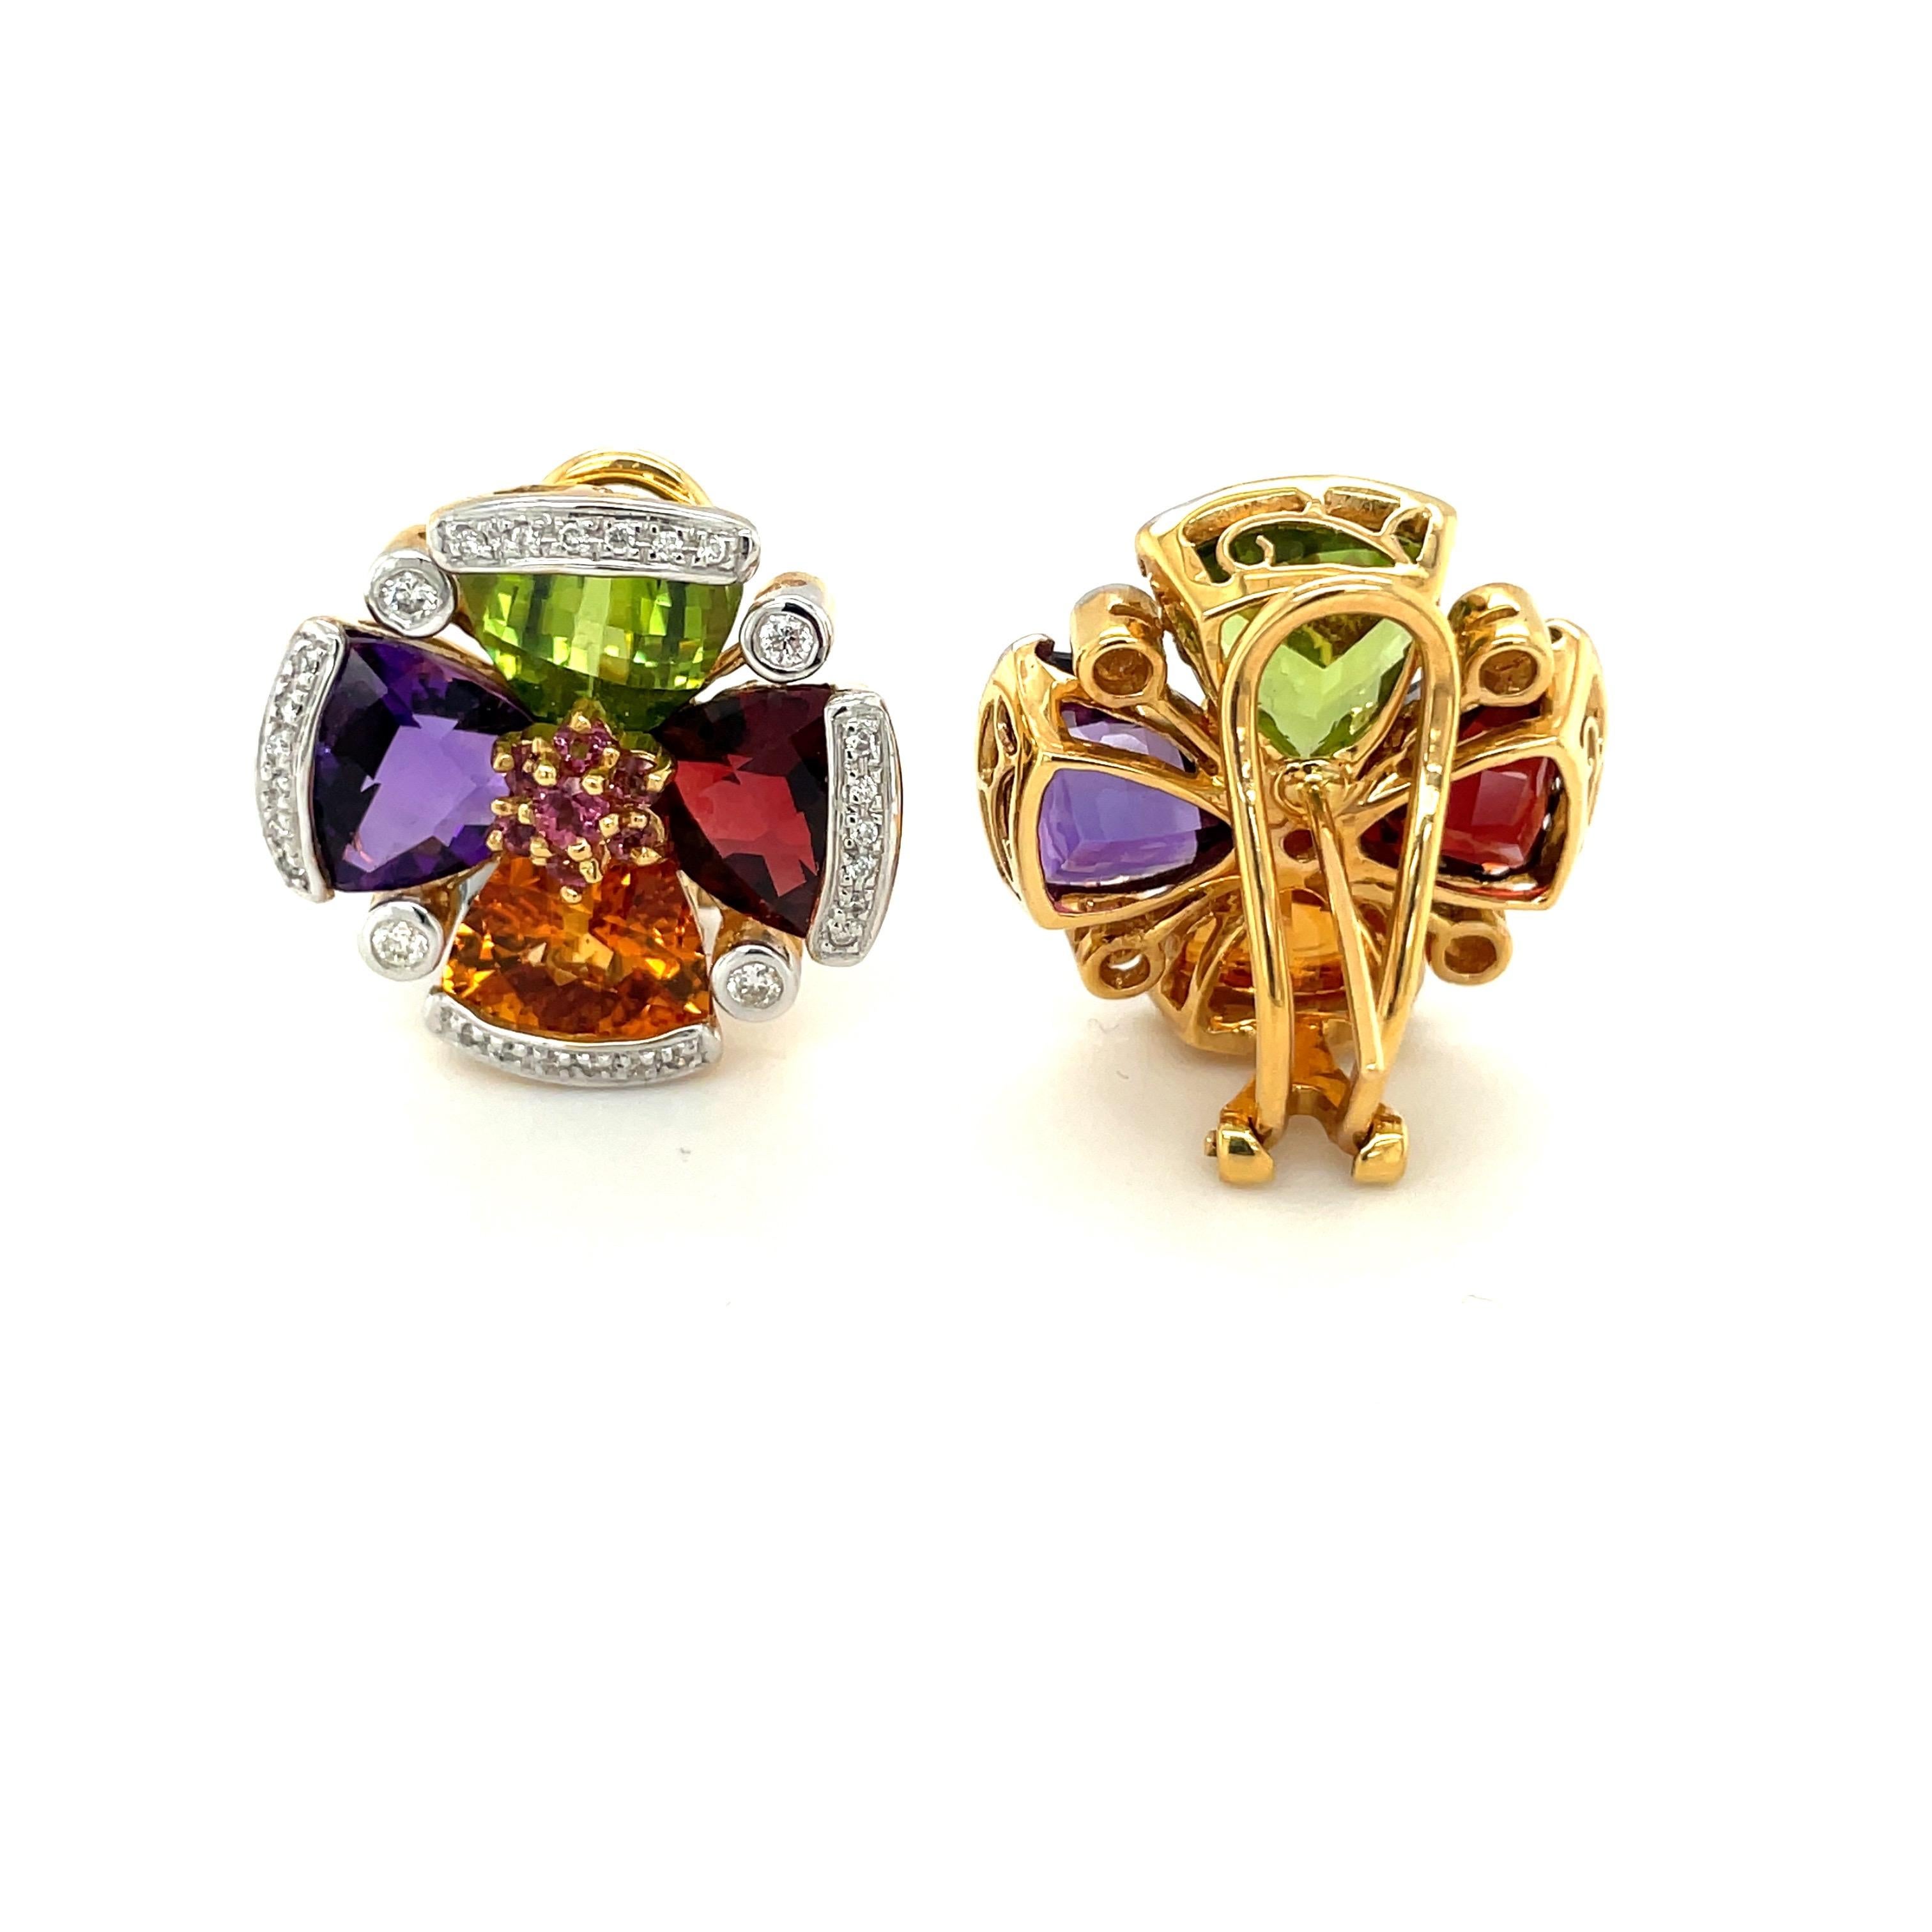 Beautiful 18 karat yellow gold , 4 petal semi precious flower earrings. Each earring is set with amethyst, peridot ,garnet, and citrine petals. Each petal is accented with diamonds. The earrings have a post/omega clip back and can be adjusted to